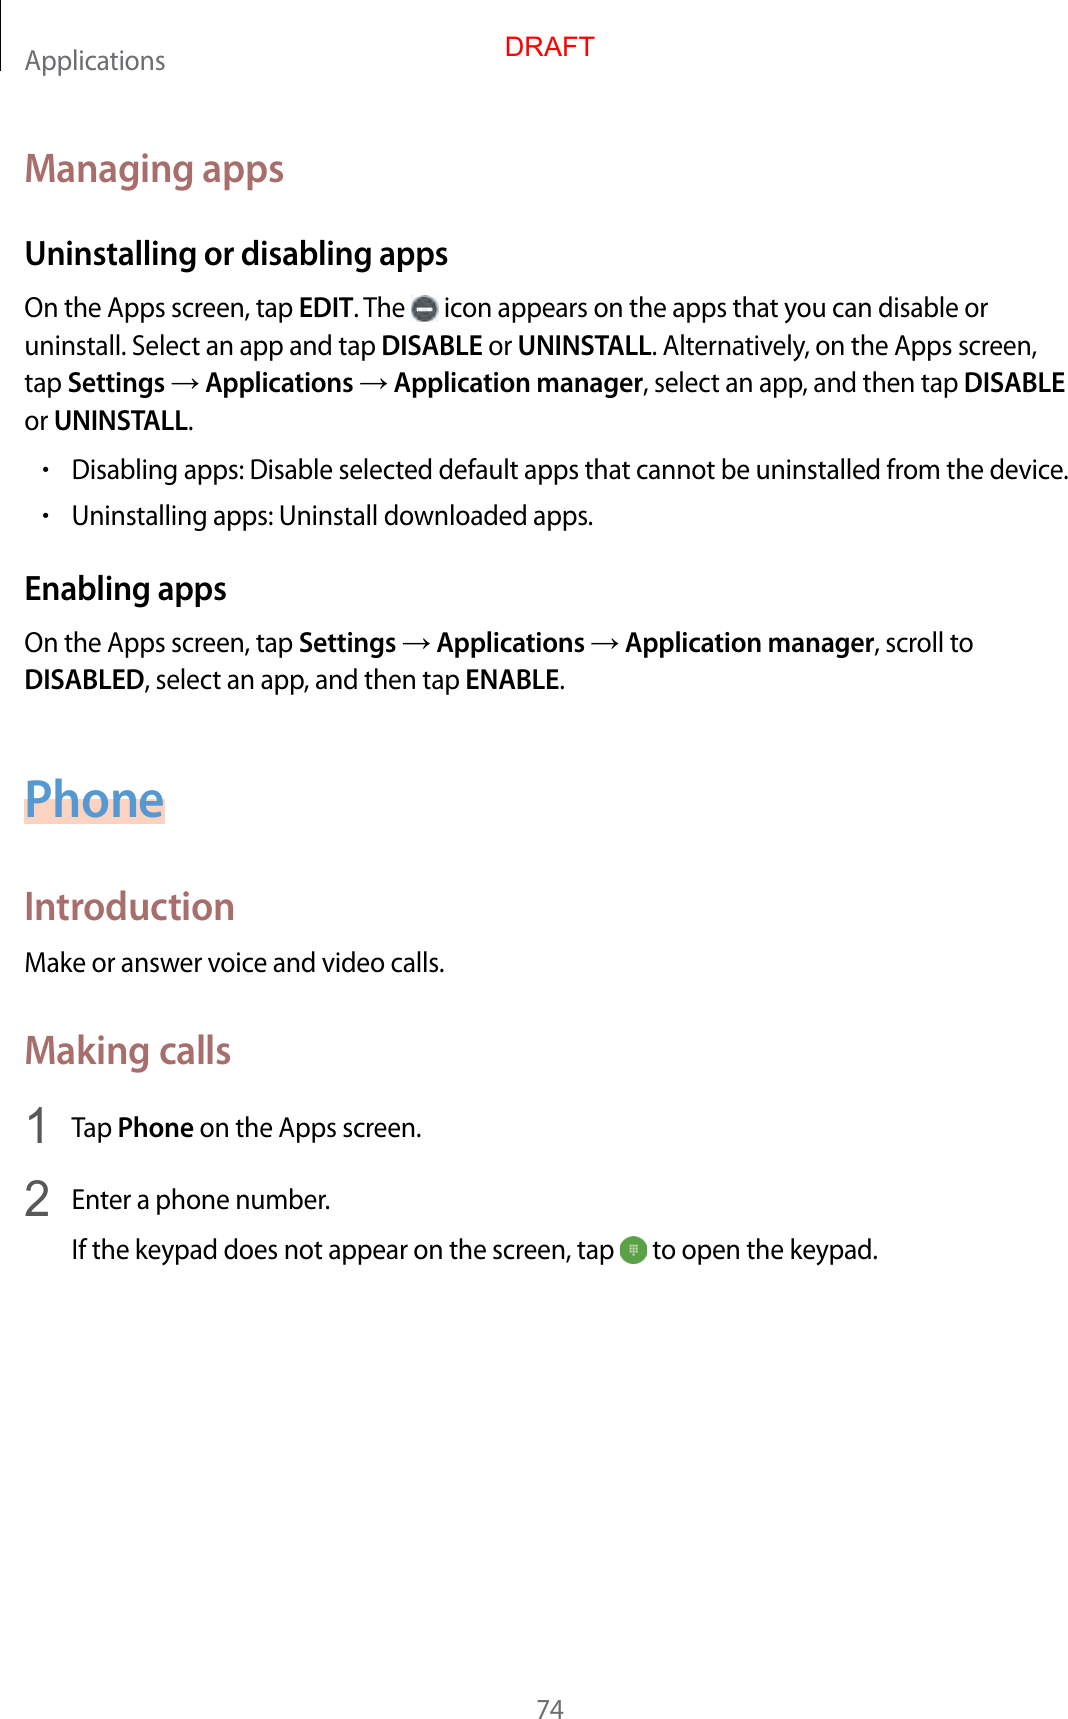 Applications74Managing appsUninstalling or disabling appsOn the Apps screen, tap EDIT. The   icon appears on the apps that you can disable or uninstall. Select an app and tap DISABLE or UNINSTALL. Alternatively, on the Apps screen, tap Settings  Applications  Application manager, select an app, and then tap DISABLE or UNINSTALL.•Disabling apps: Disable selected default apps that cannot be uninstalled from the device.•Uninstalling apps: Uninstall downloaded apps.Enabling appsOn the Apps screen, tap Settings  Applications  Application manager, scroll to DISABLED, select an app, and then tap ENABLE.PhoneIntroductionMake or answer voice and video calls.Making calls1  Tap Phone on the Apps screen.2  Enter a phone number.If the keypad does not appear on the screen, tap   to open the keypad.DRAFT